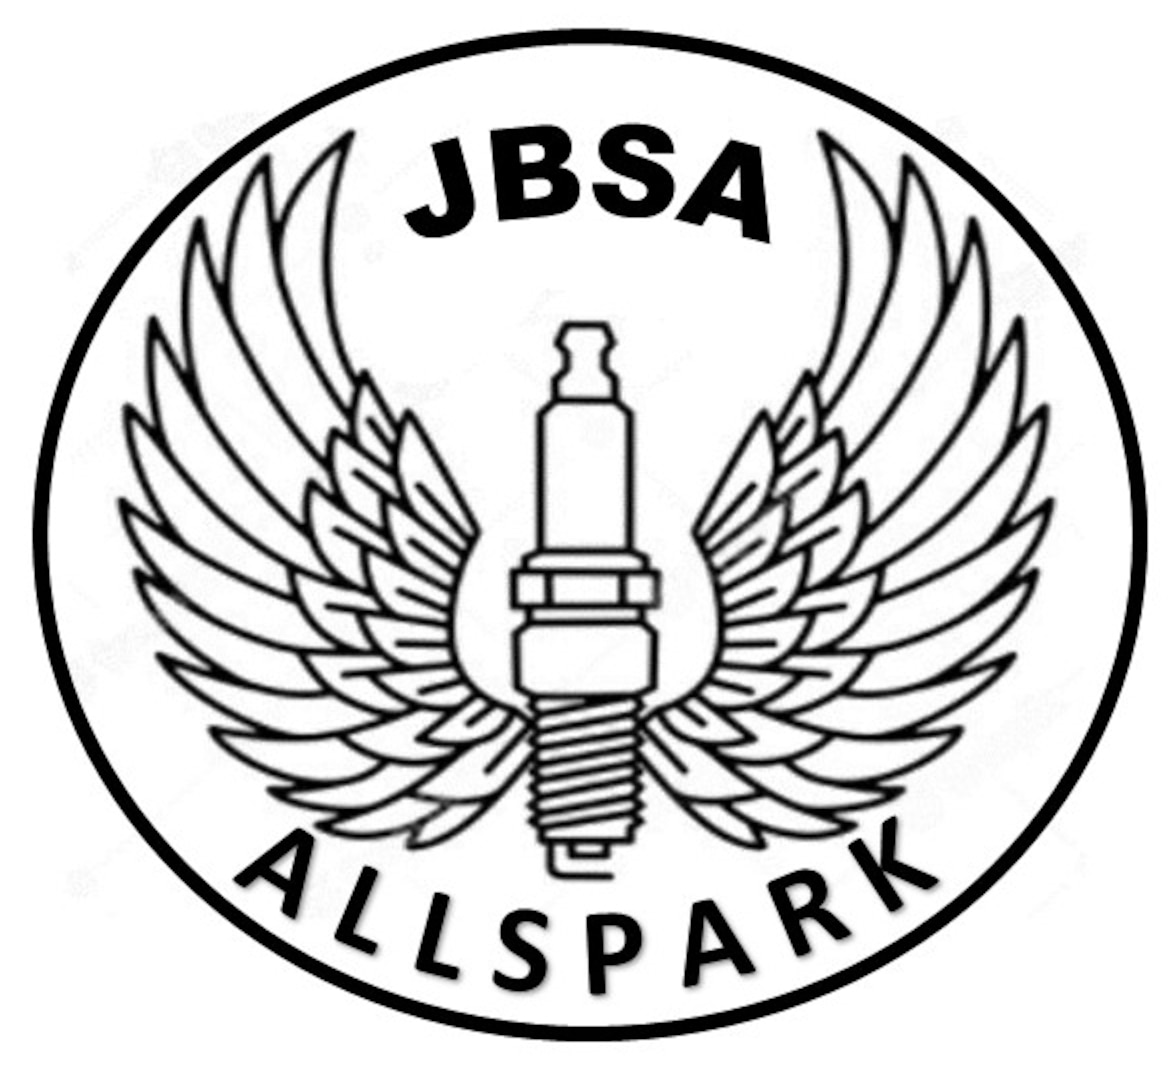 The innovation cells which have been meeting since last year have come up with a name for their group: JBSA AllSpark.